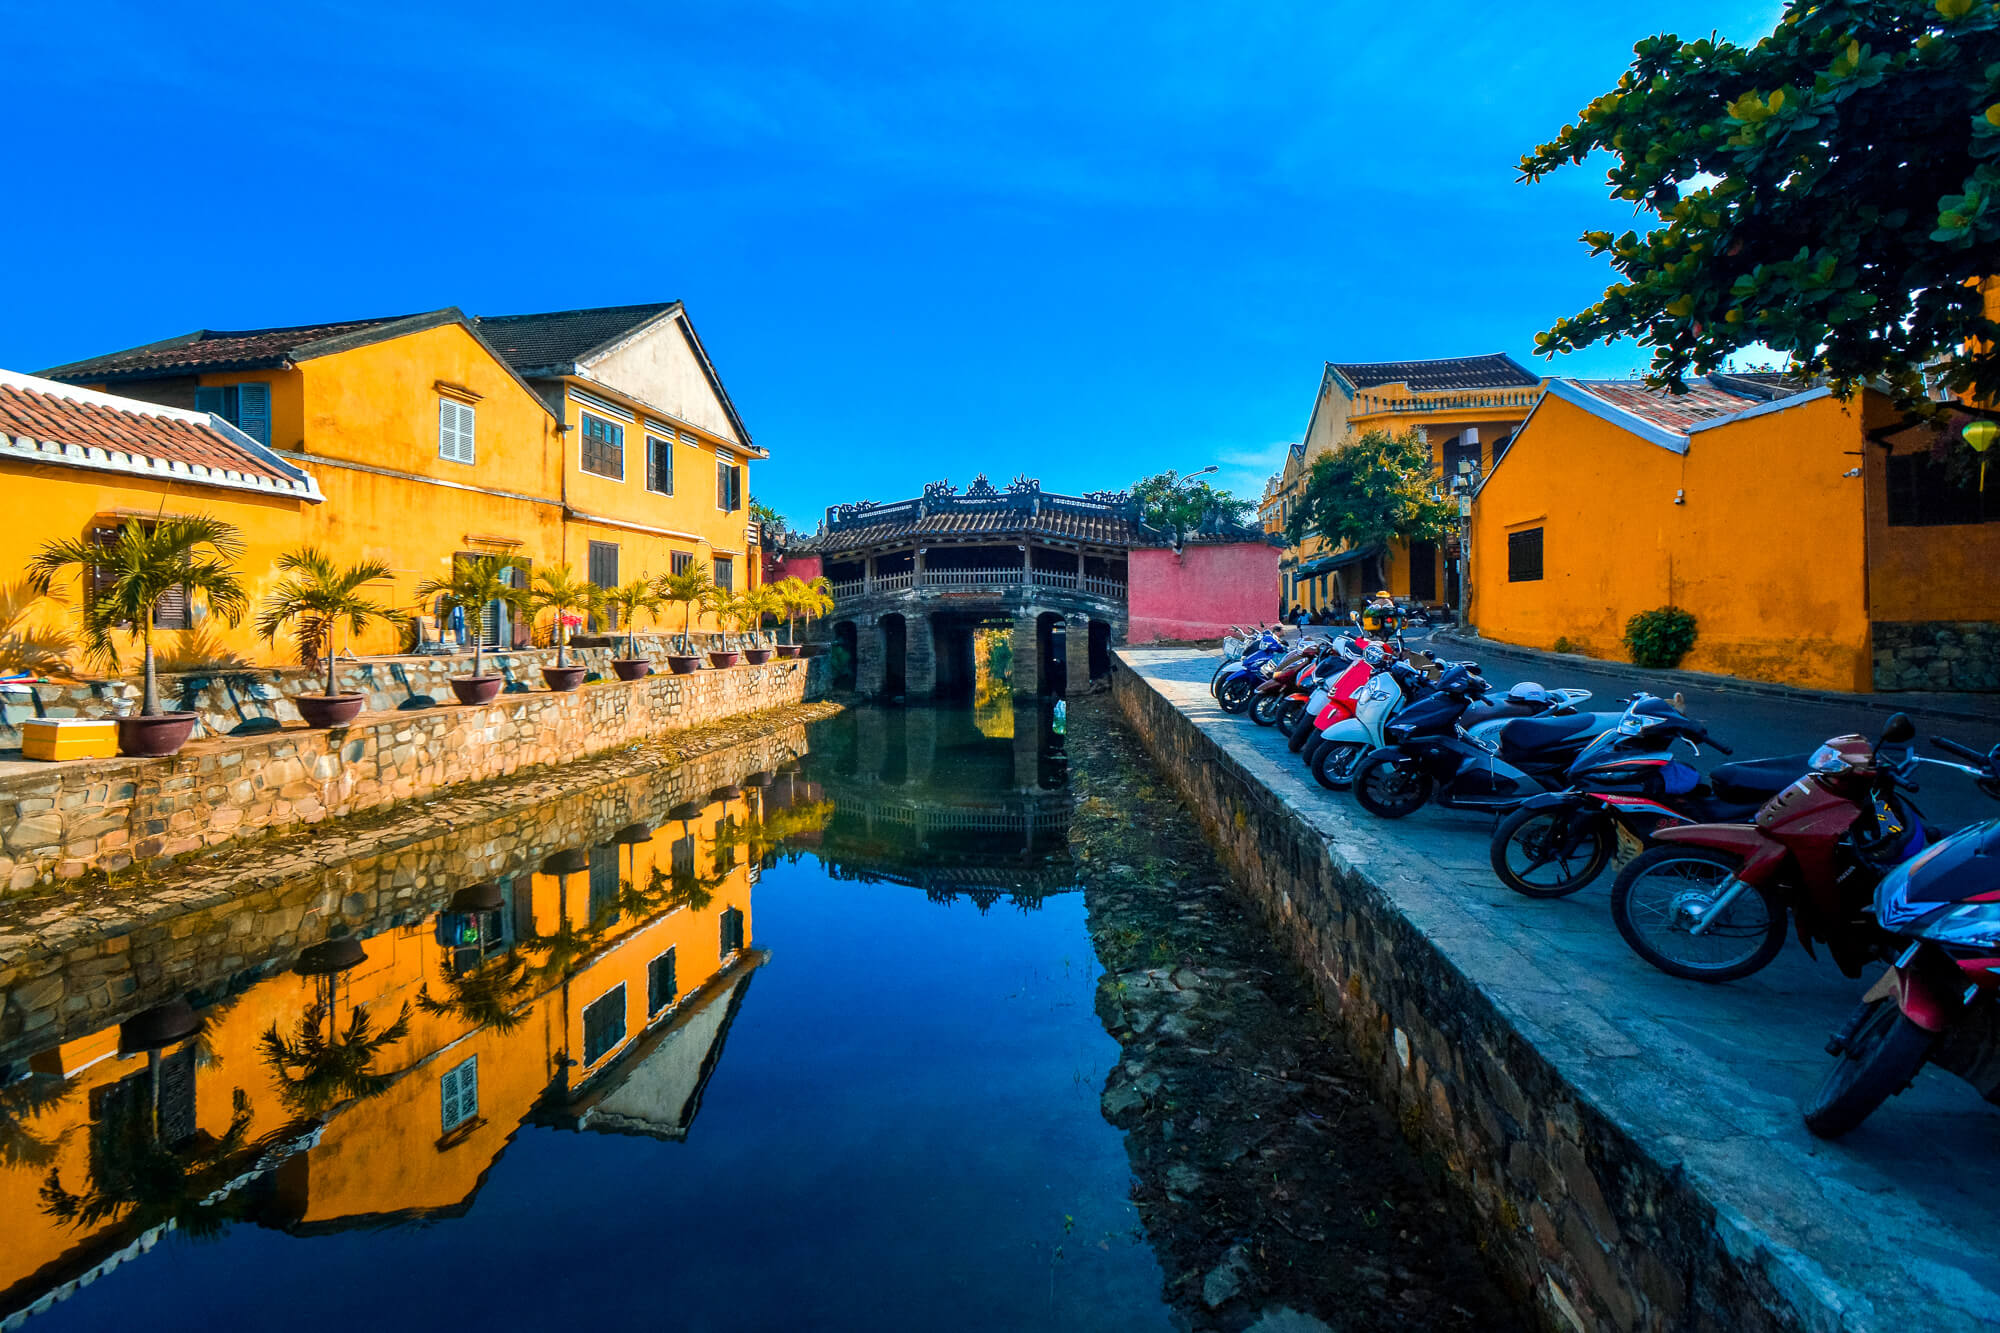 Tranquil Hoi An Ancient Town - tips for first time visitors when traveling to vietnam